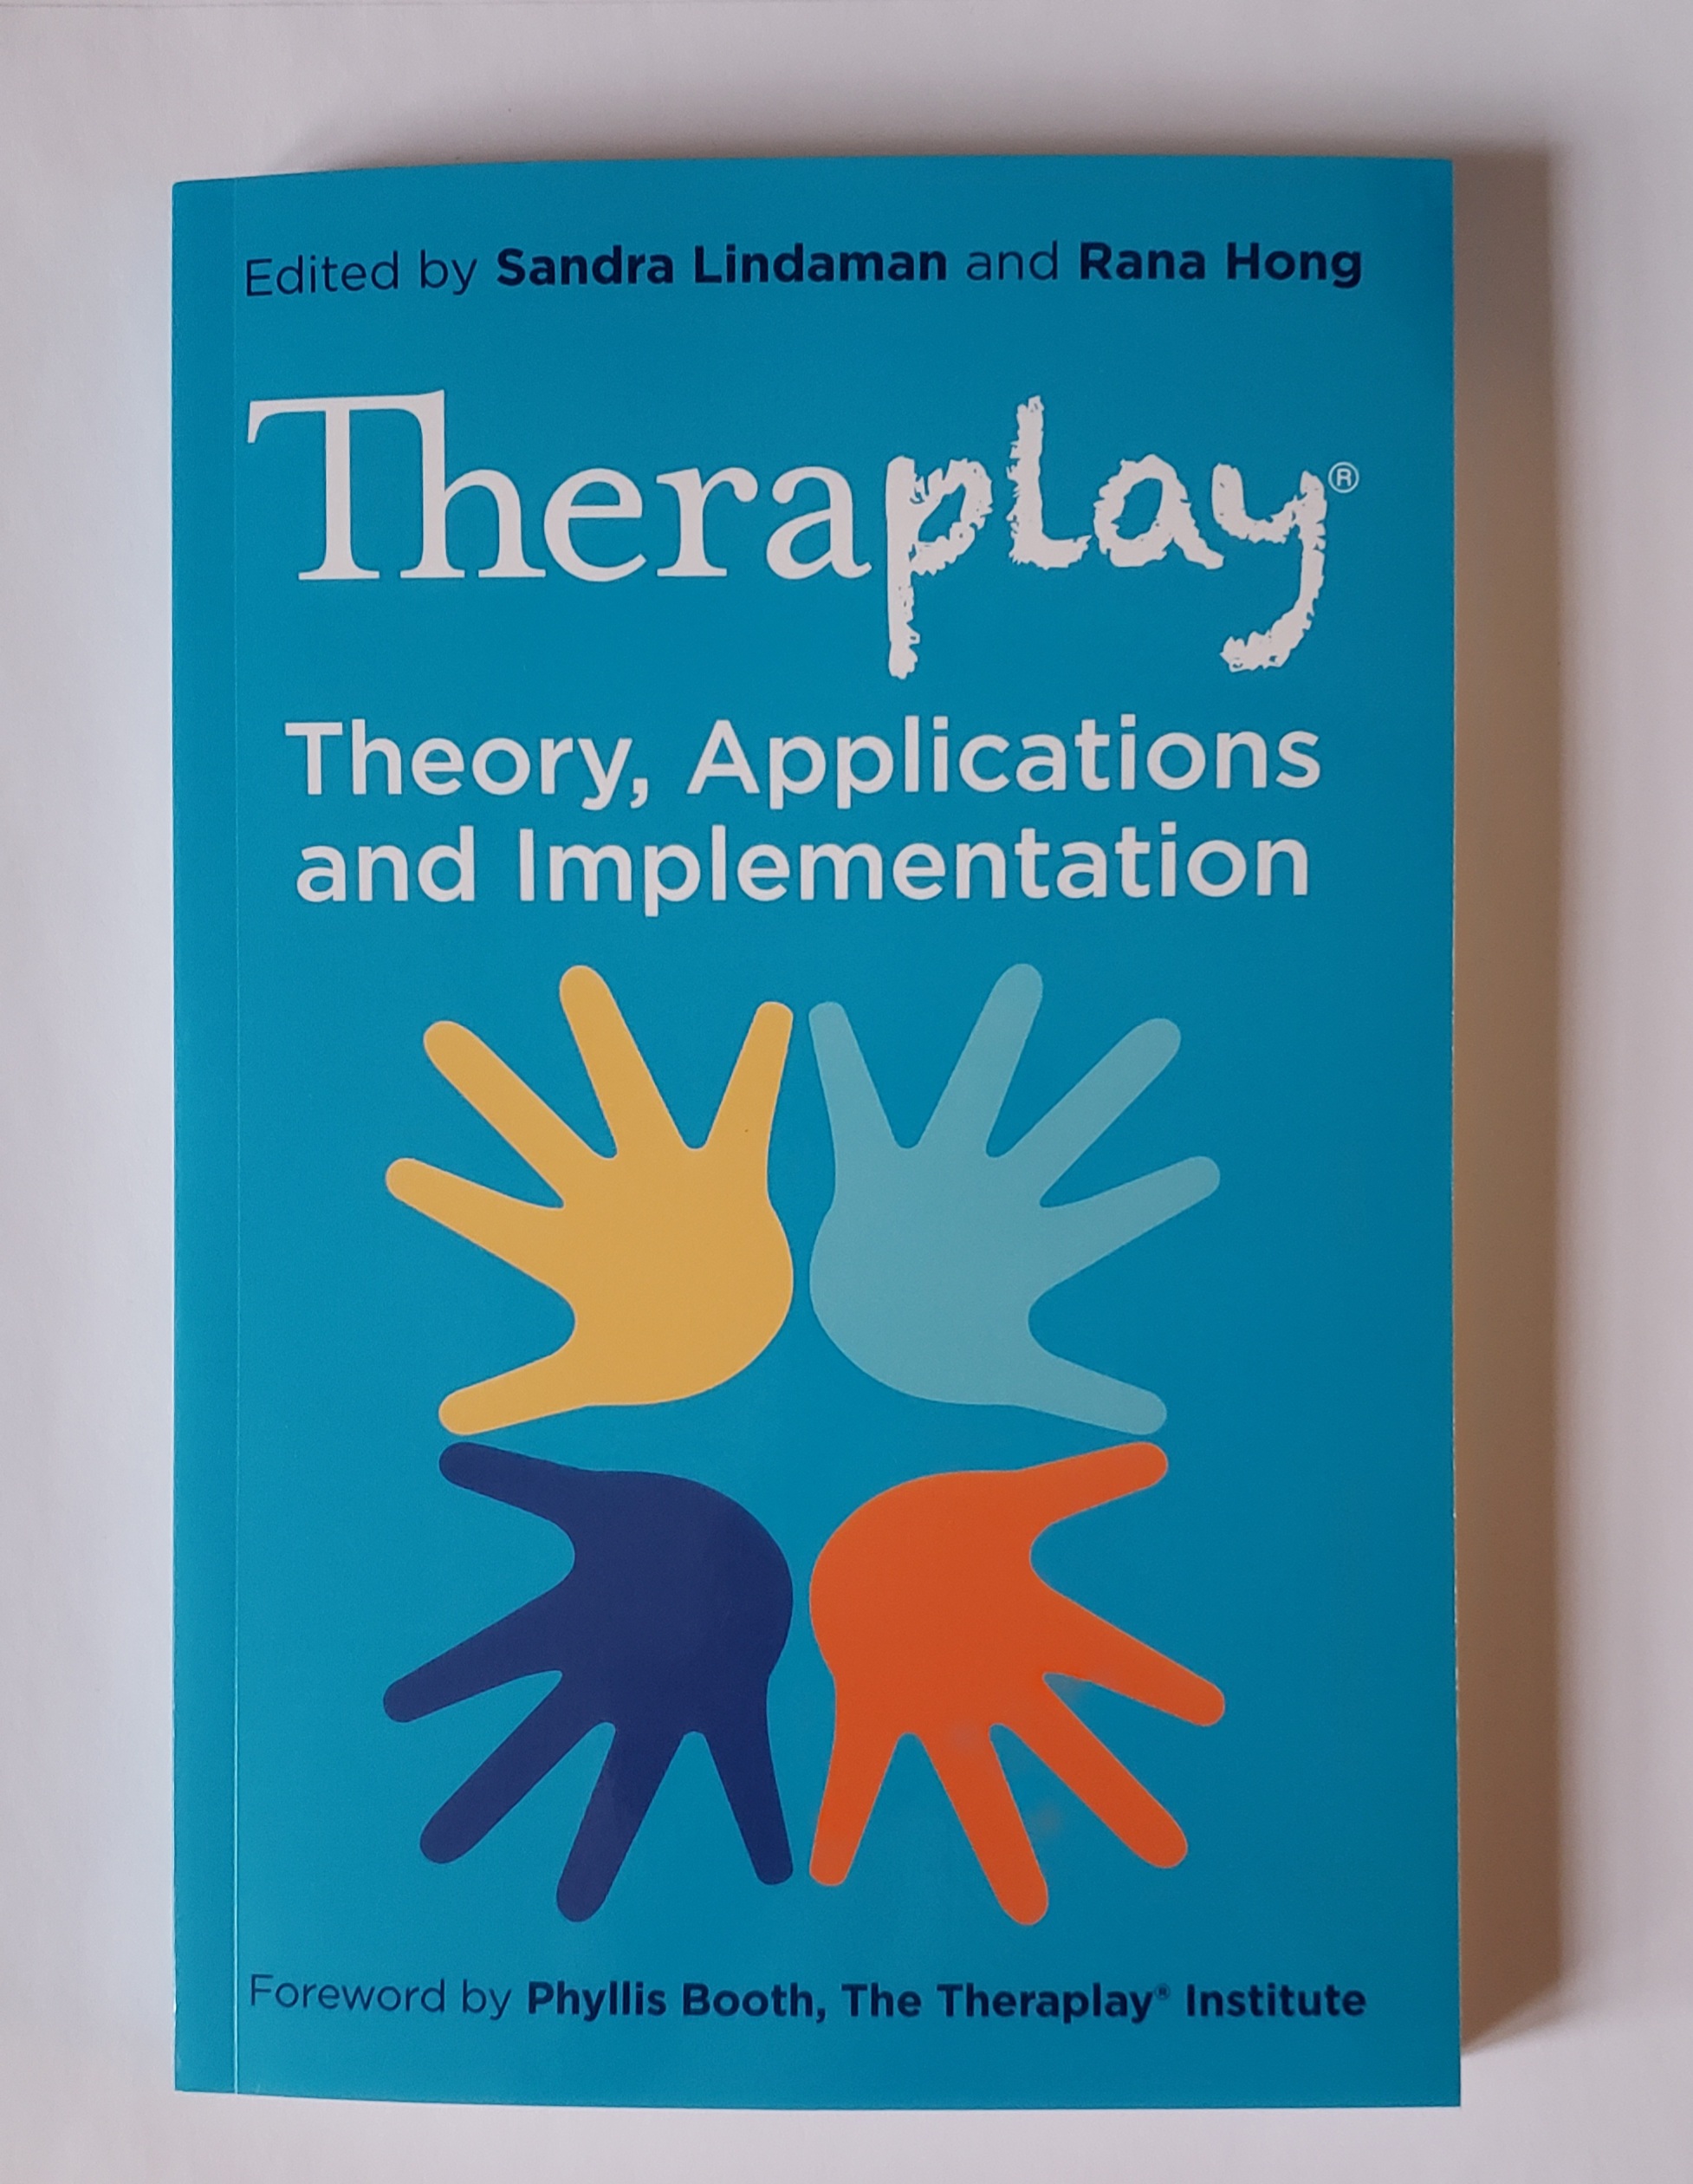 Theraplay Theory and Applications